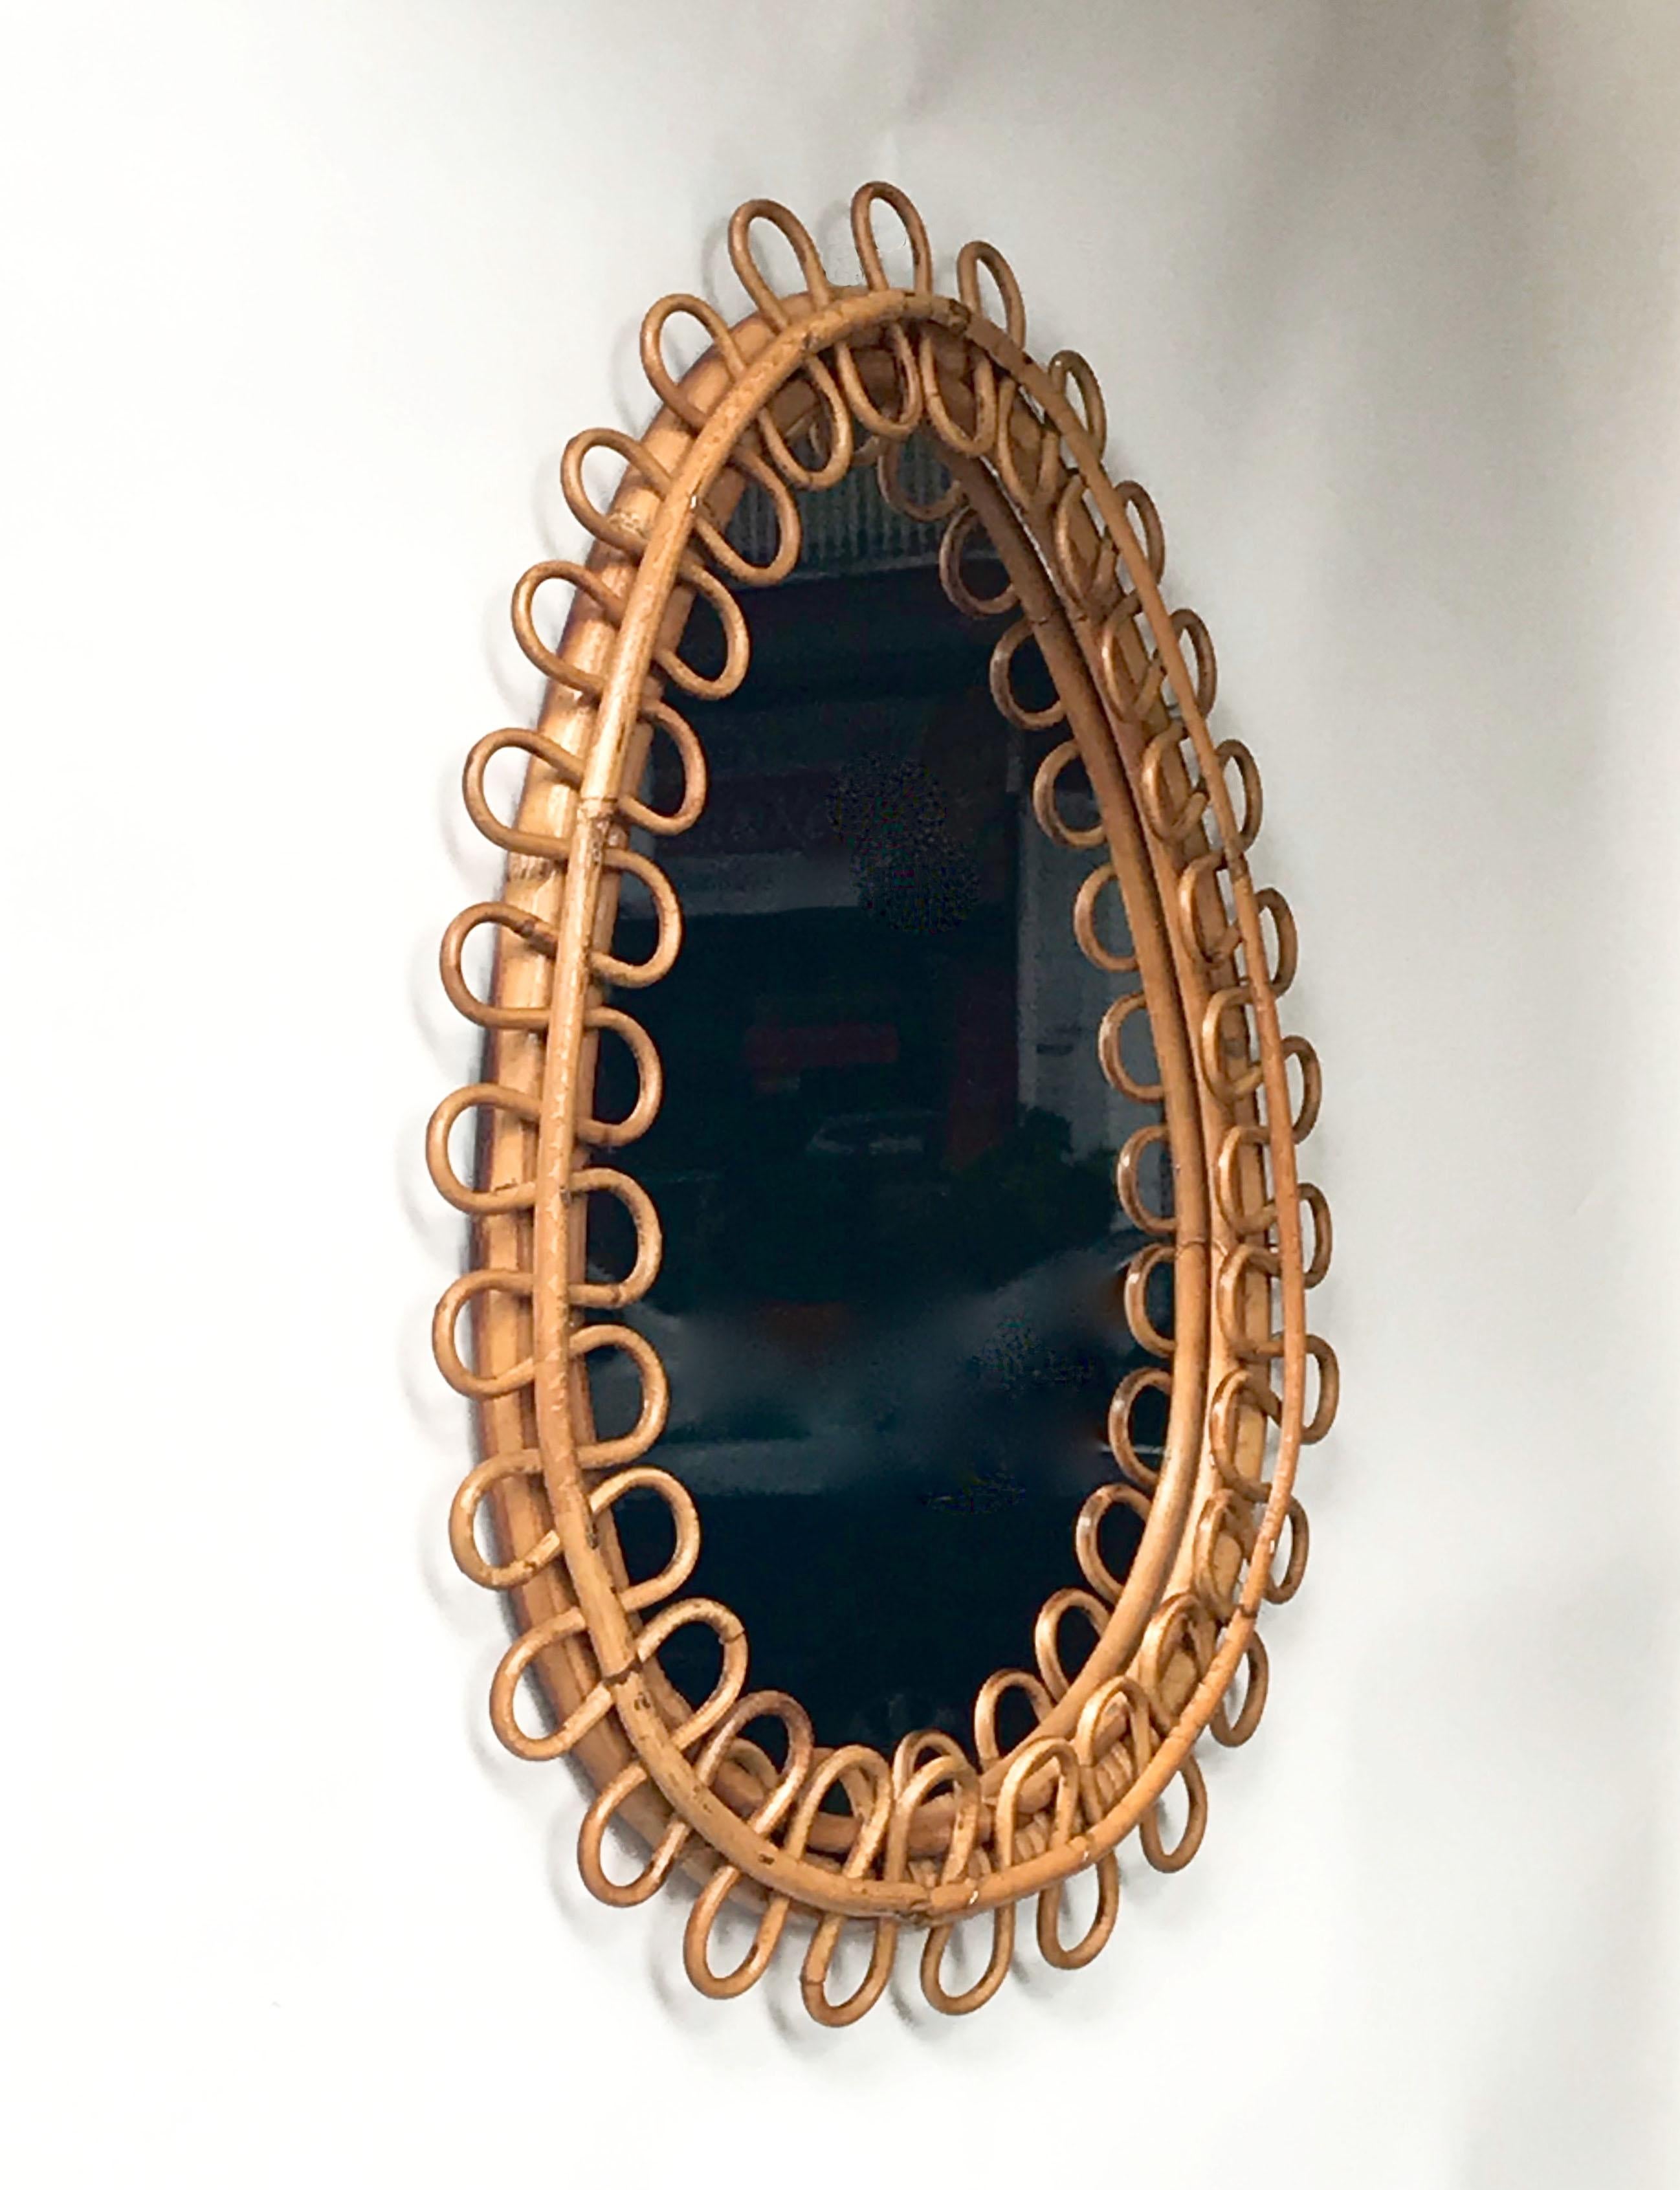 Midcentury decorative oval mirror with curved rattan beams and bamboo frame. This marvellous item was made in Italy during the 1950s.

This piece is unique as it has a sinusoidal rattan frame adding fine and elegant lines to its drop-shaped